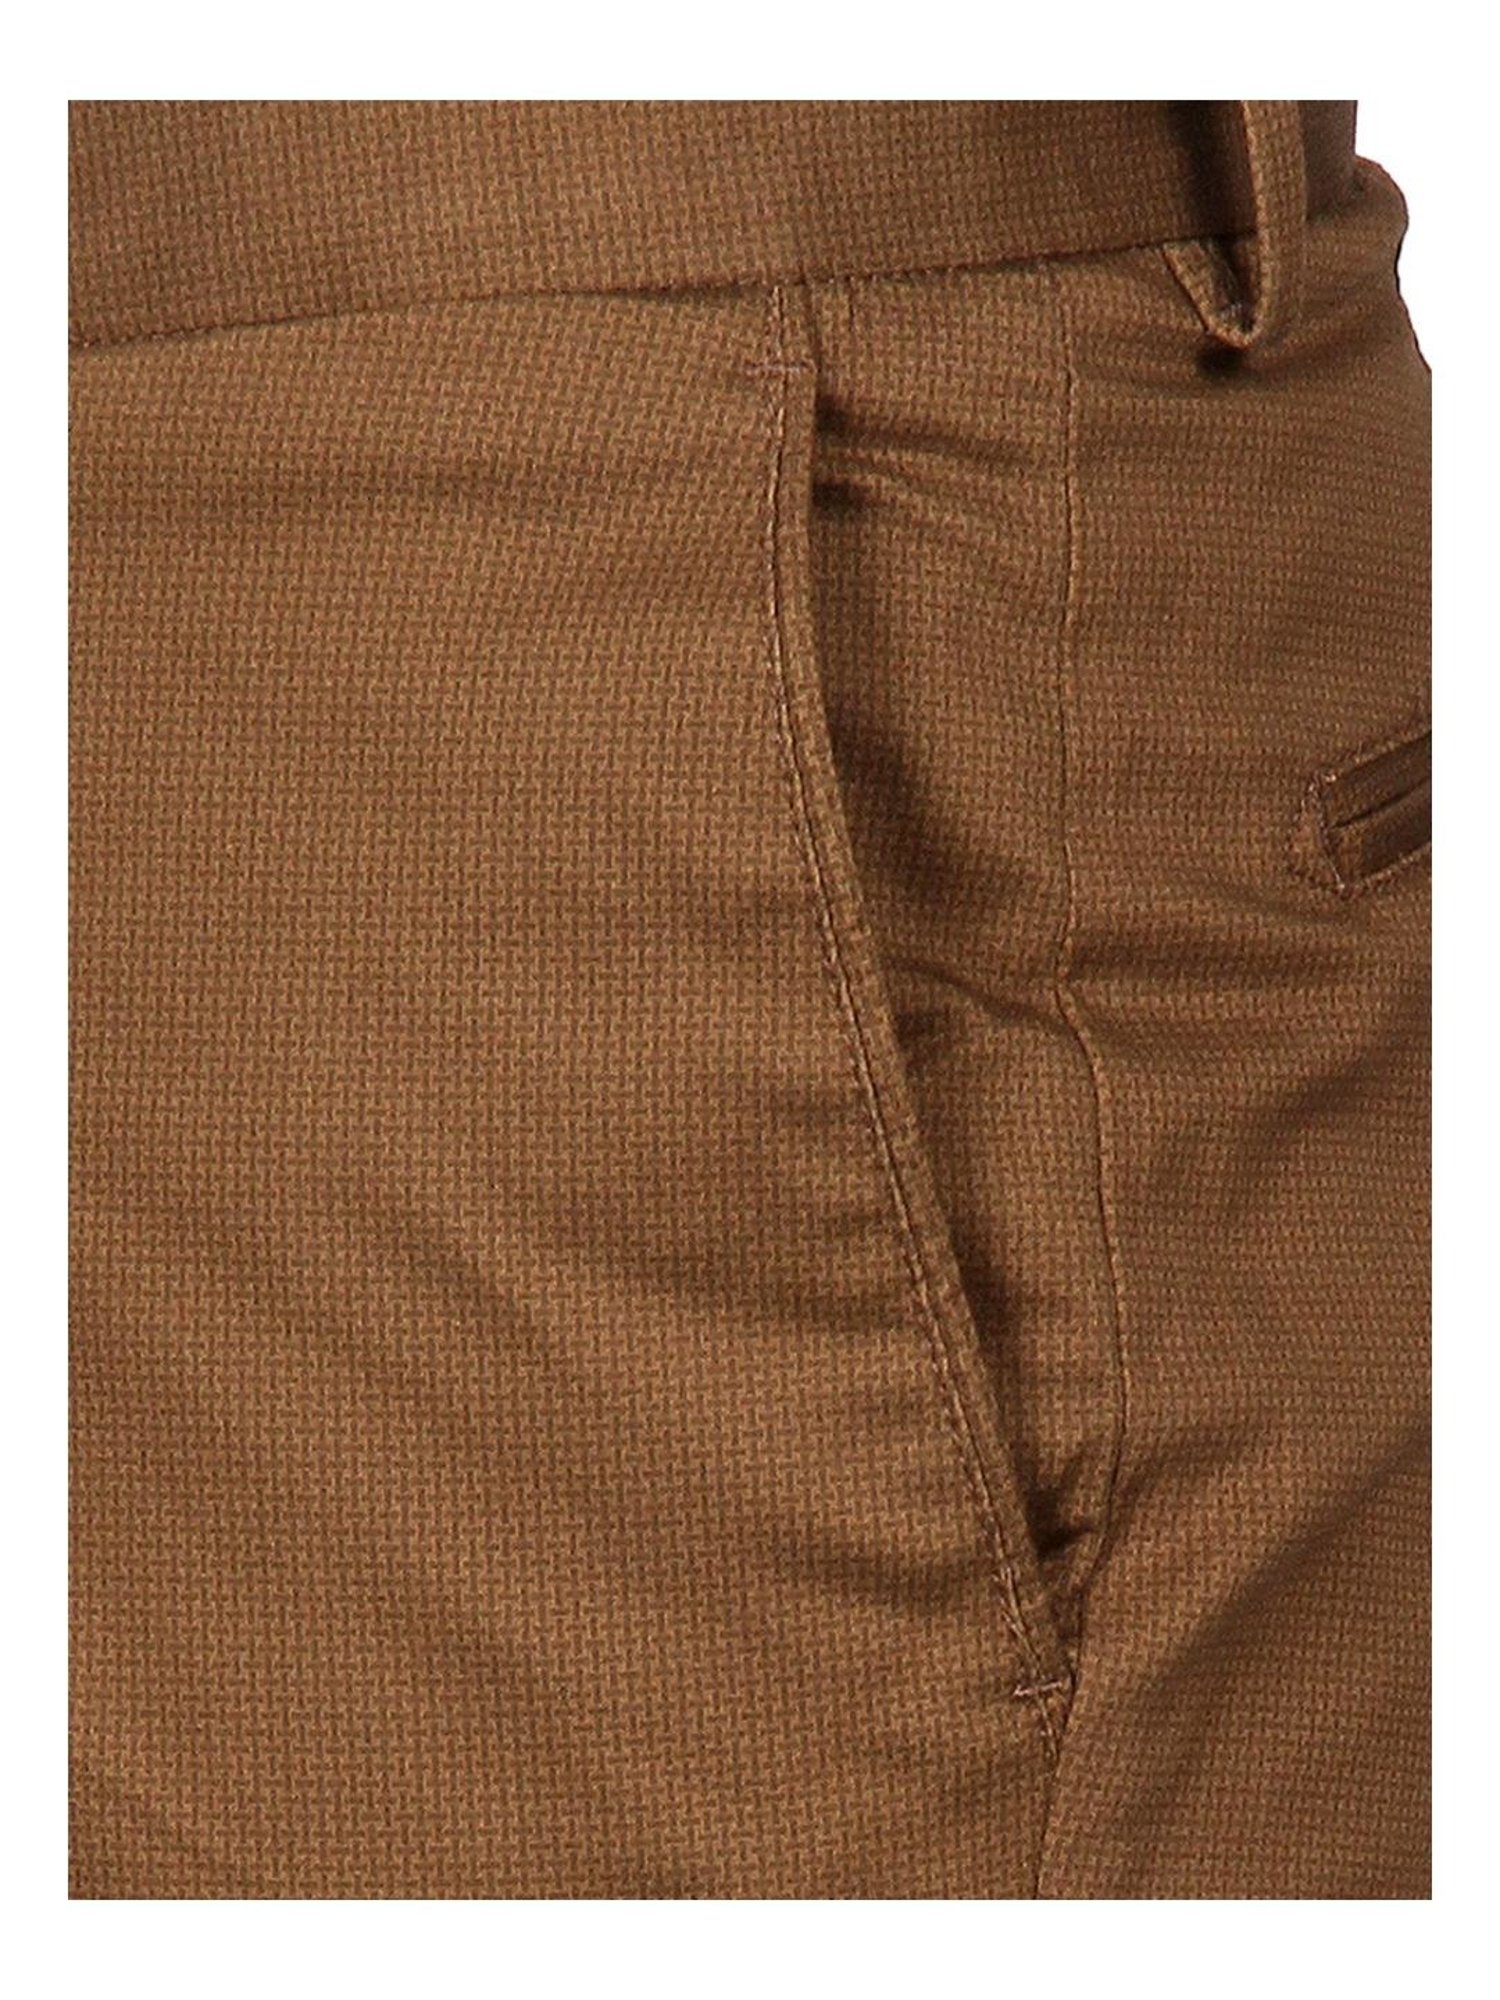 Blackberrys Casual Trousers  Buy Blackberrys Clay Casual Solid In Olive B90  Fit Trouser Online  Nykaa Fashion